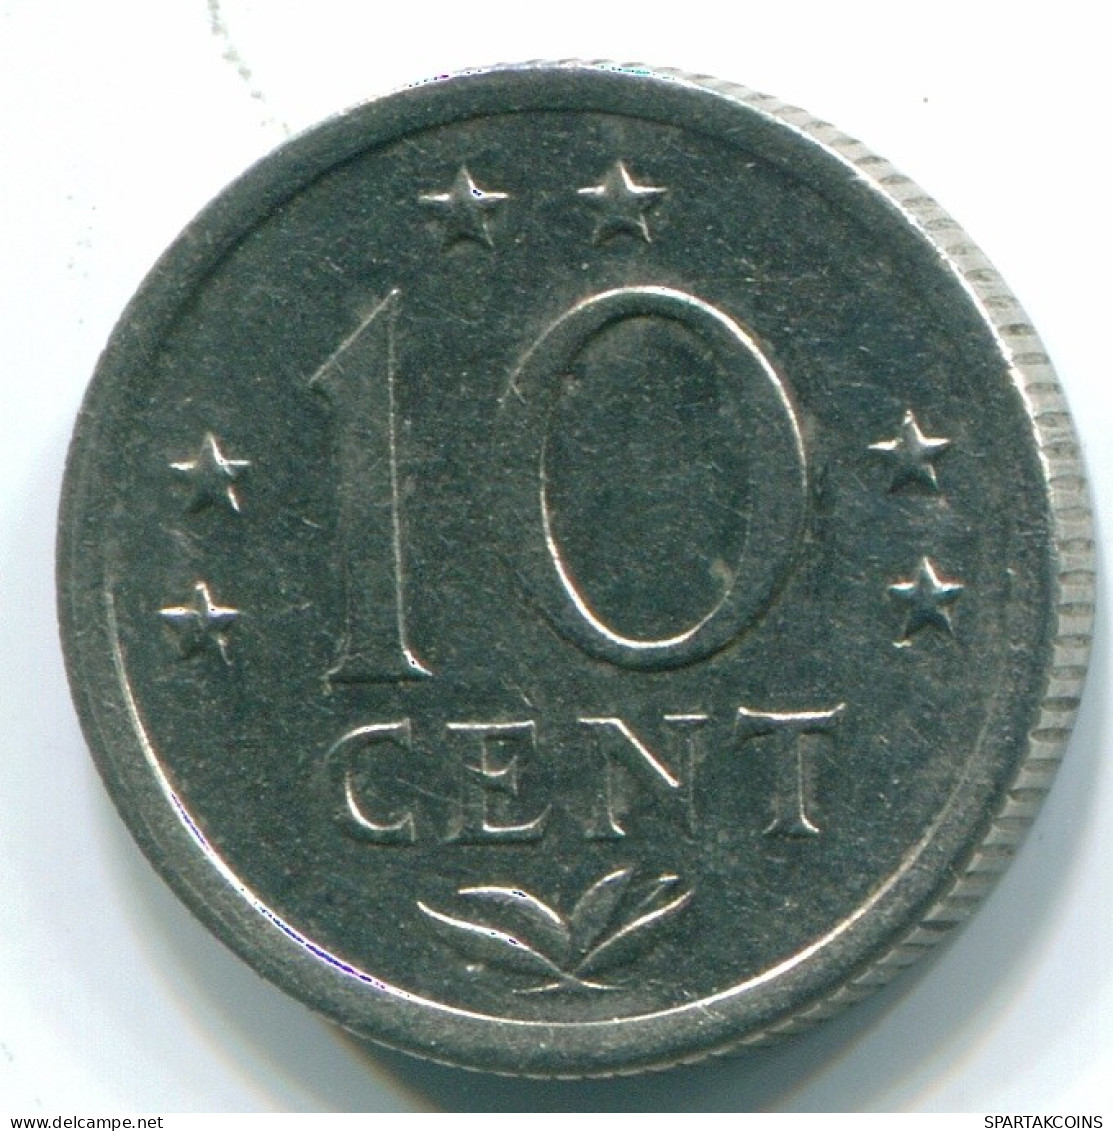 10 CENTS 1971 NETHERLANDS ANTILLES Nickel Colonial Coin #S13464.U.A - Antille Olandesi